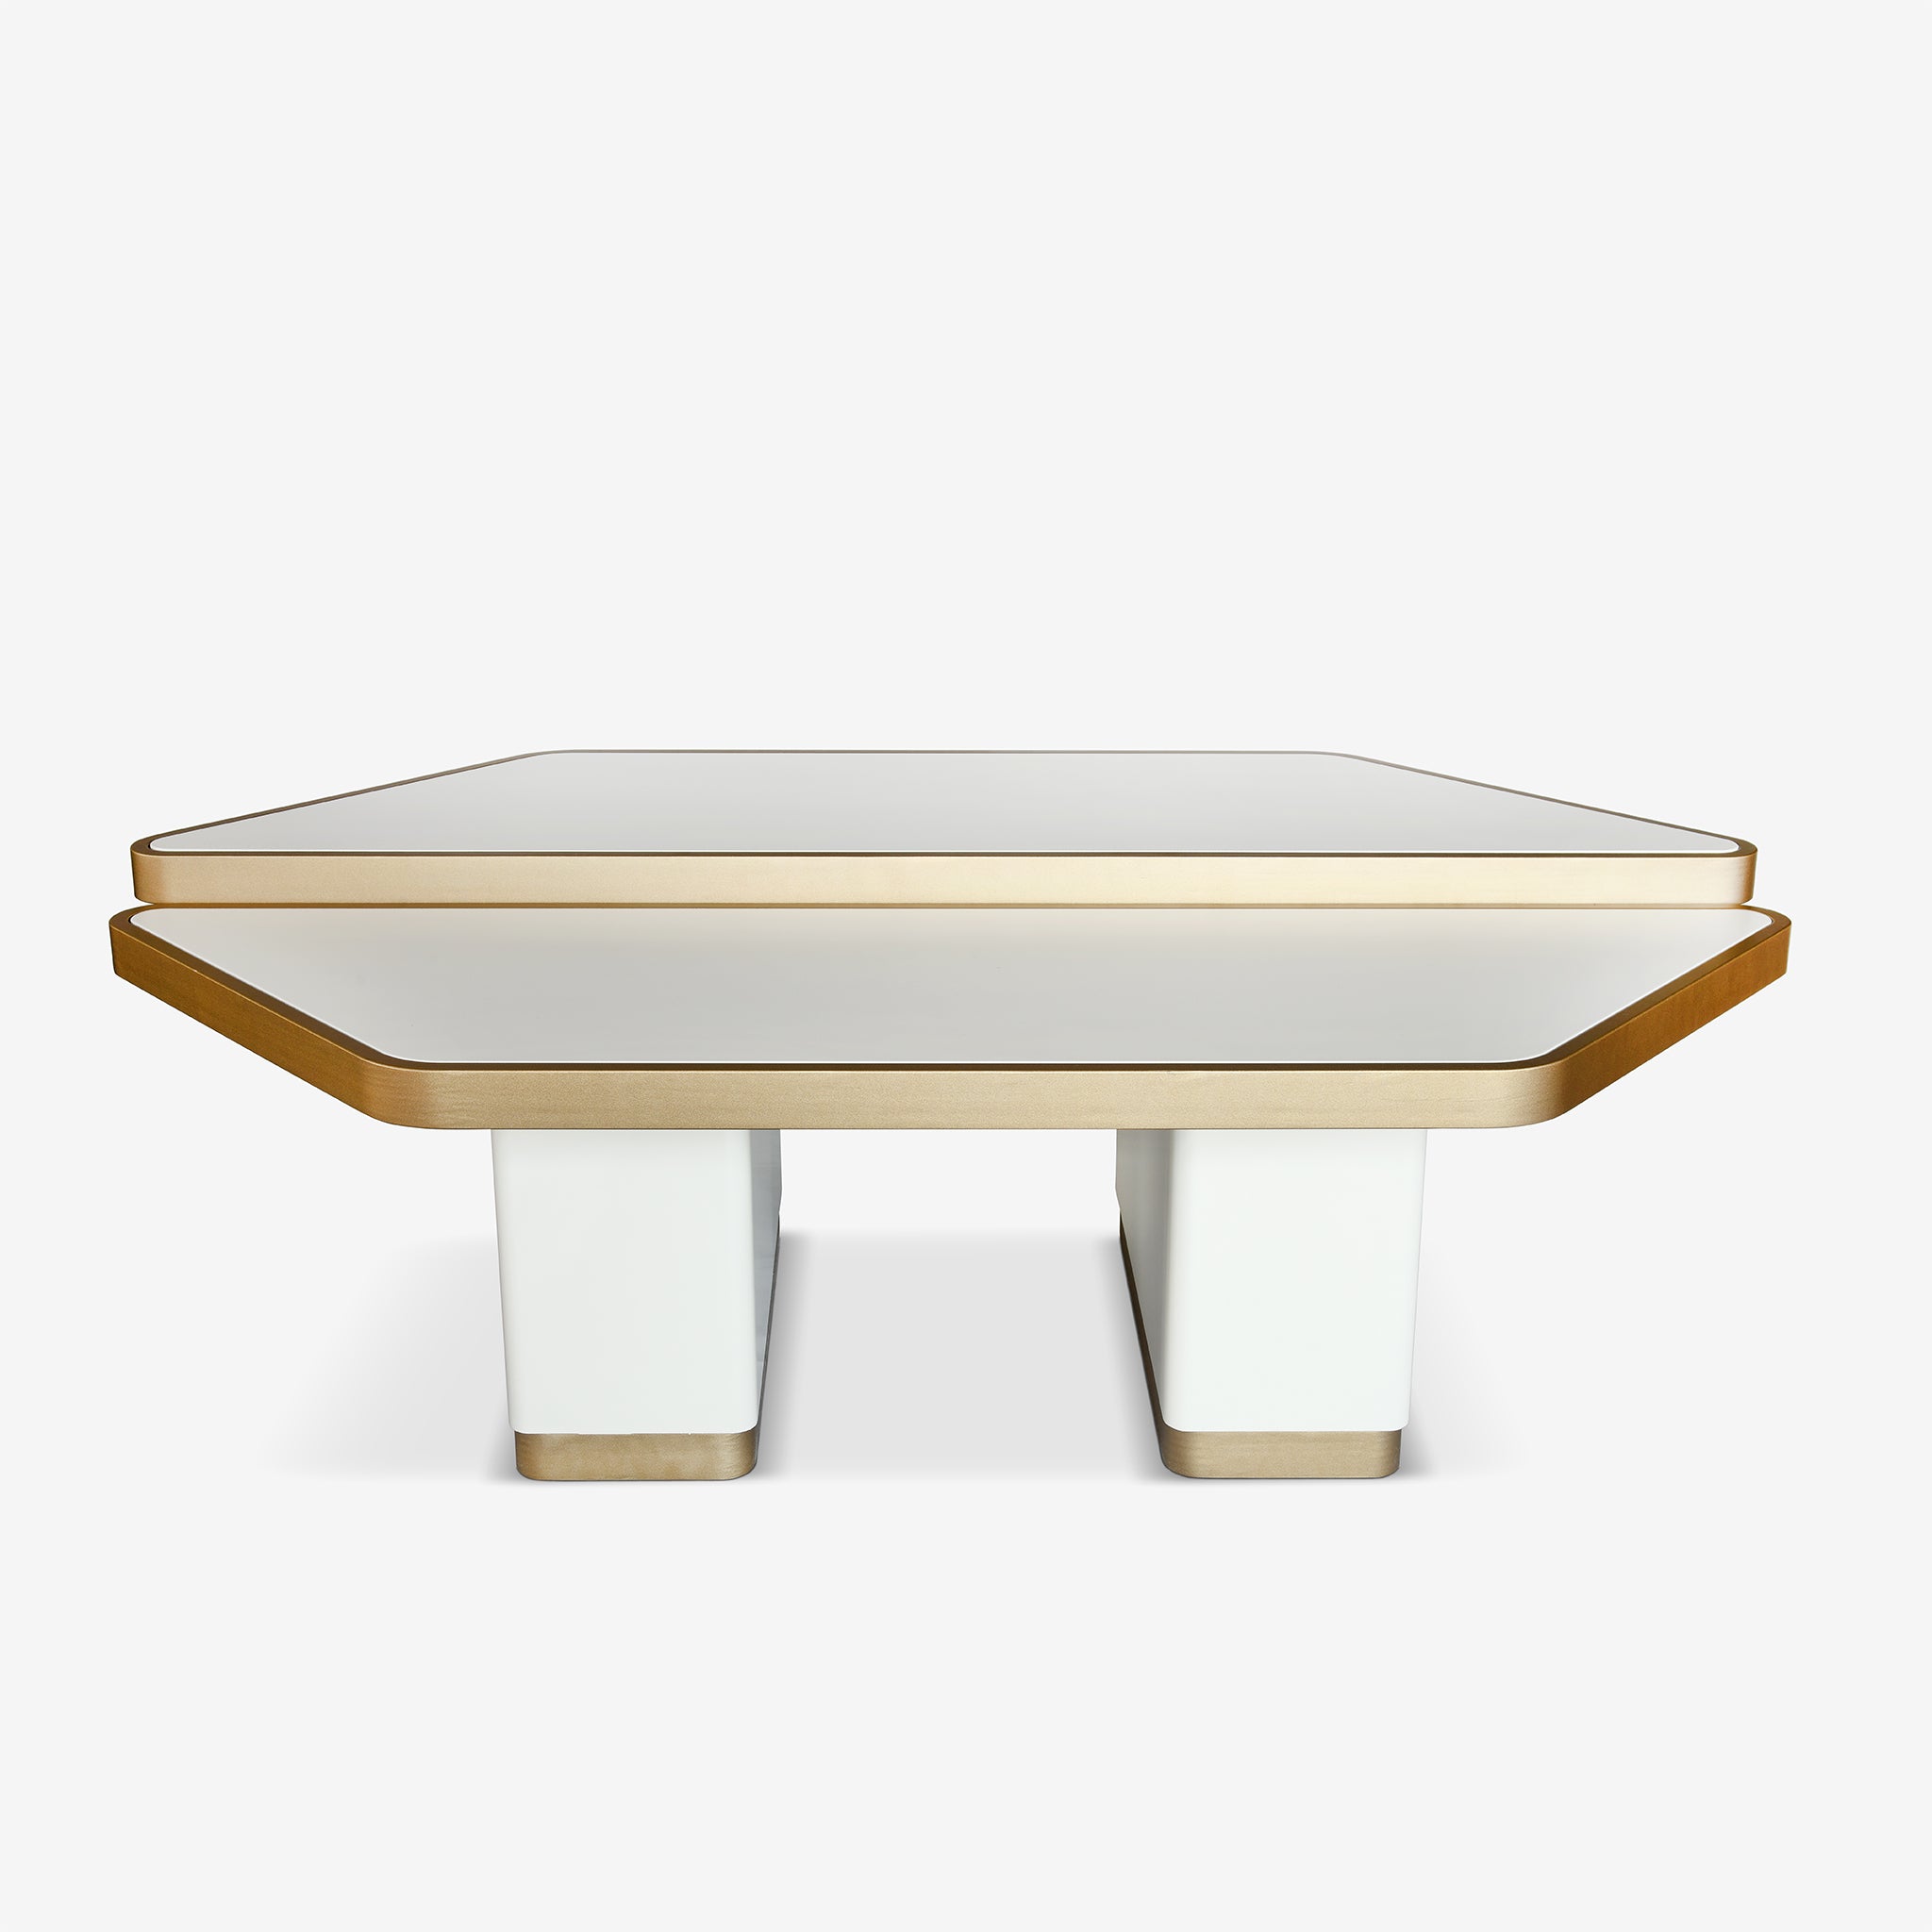 Bazaar, Coffee Table, Contemporary Design, Luxury Furniture, Brass Details, White Lacquer